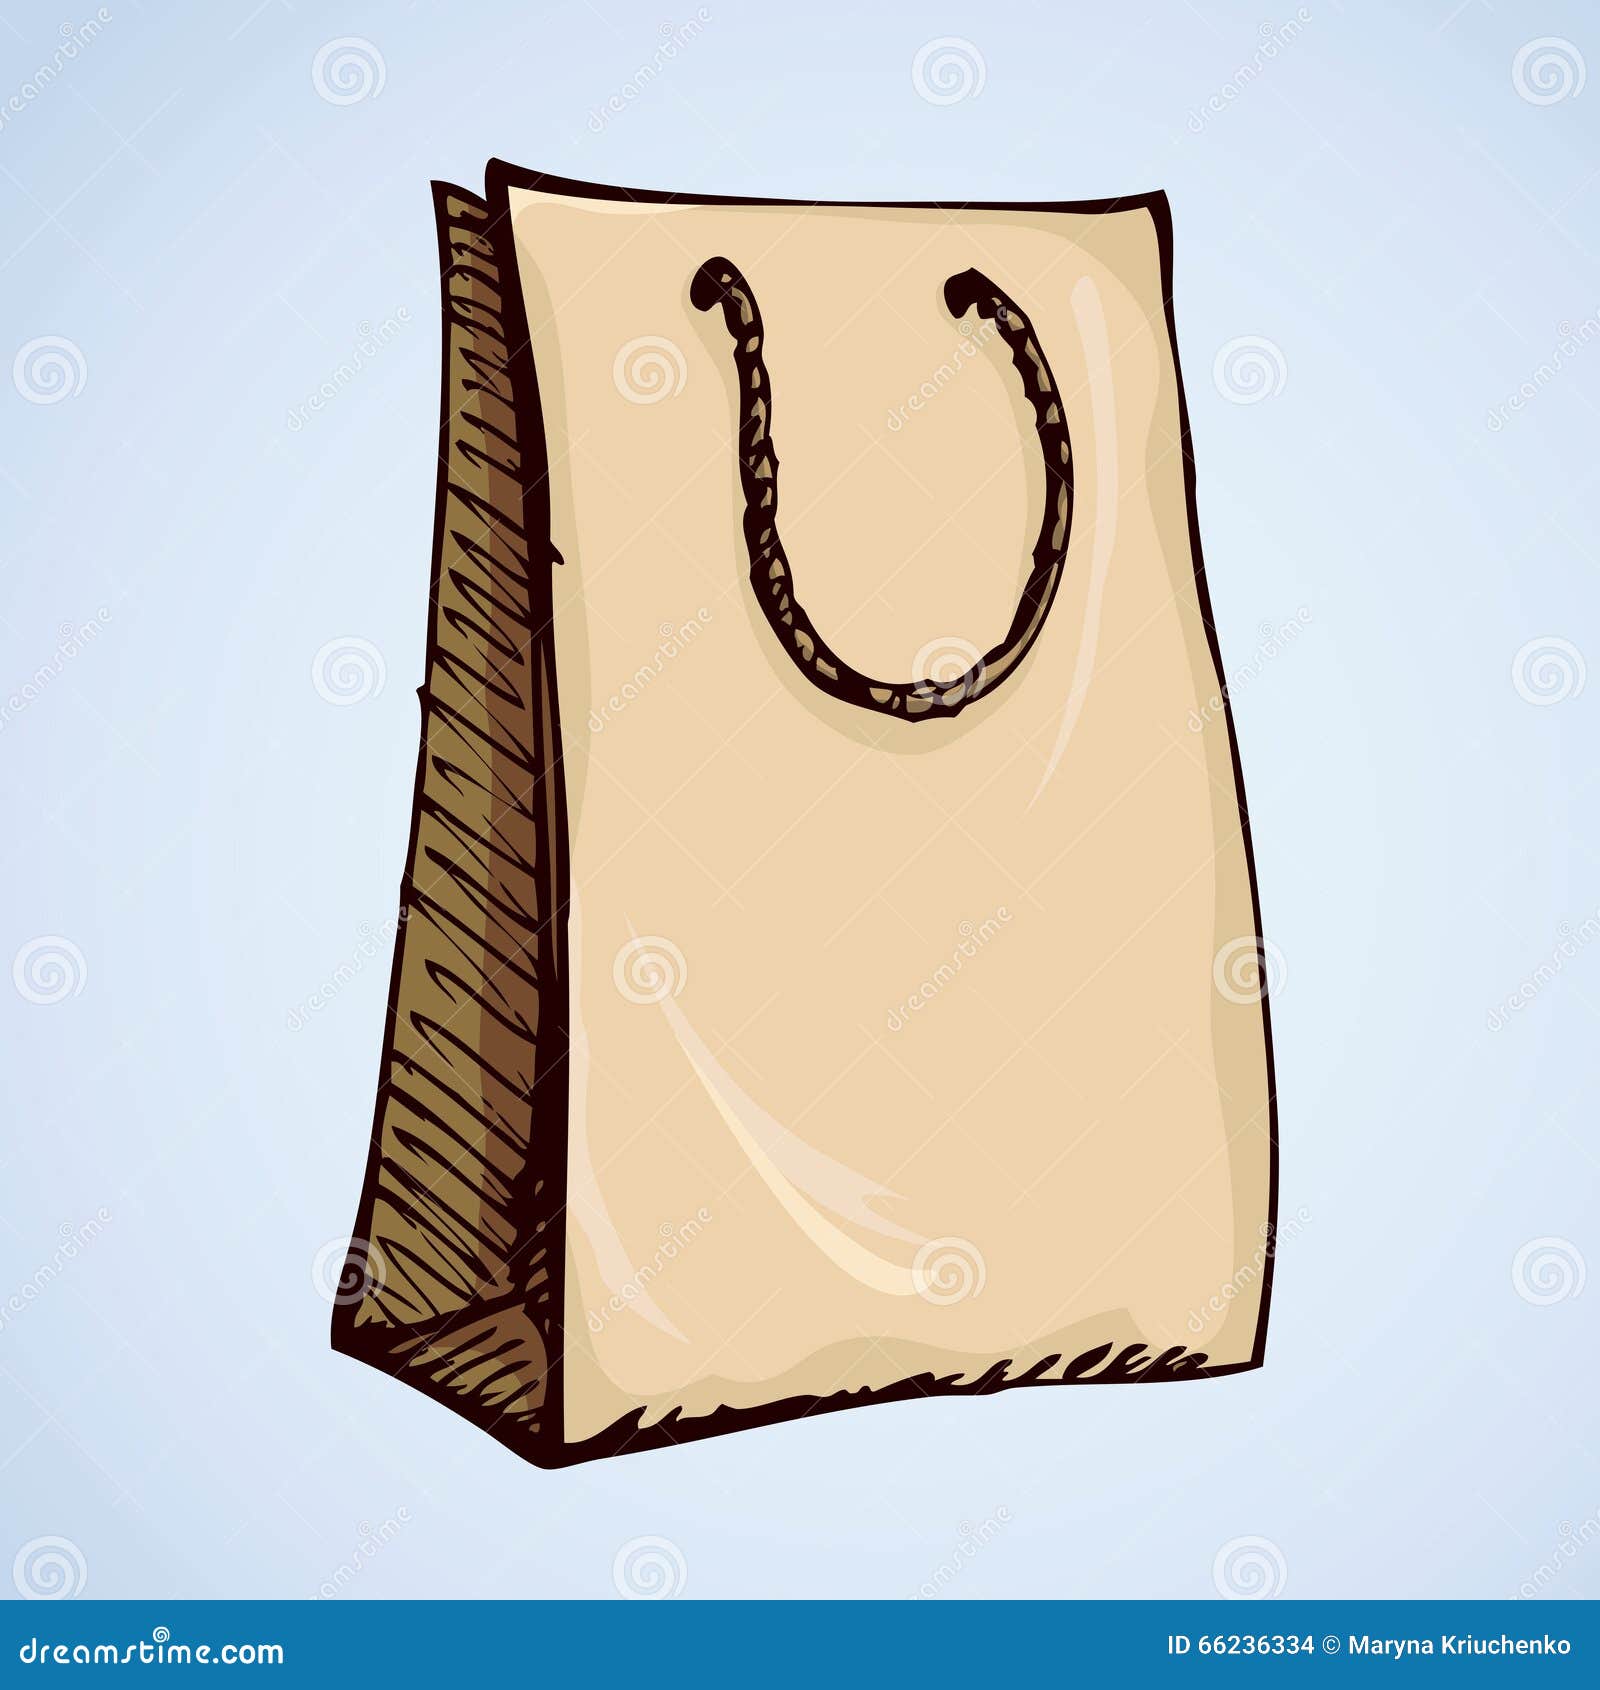 How to draw a Shopping Bag - YouTube